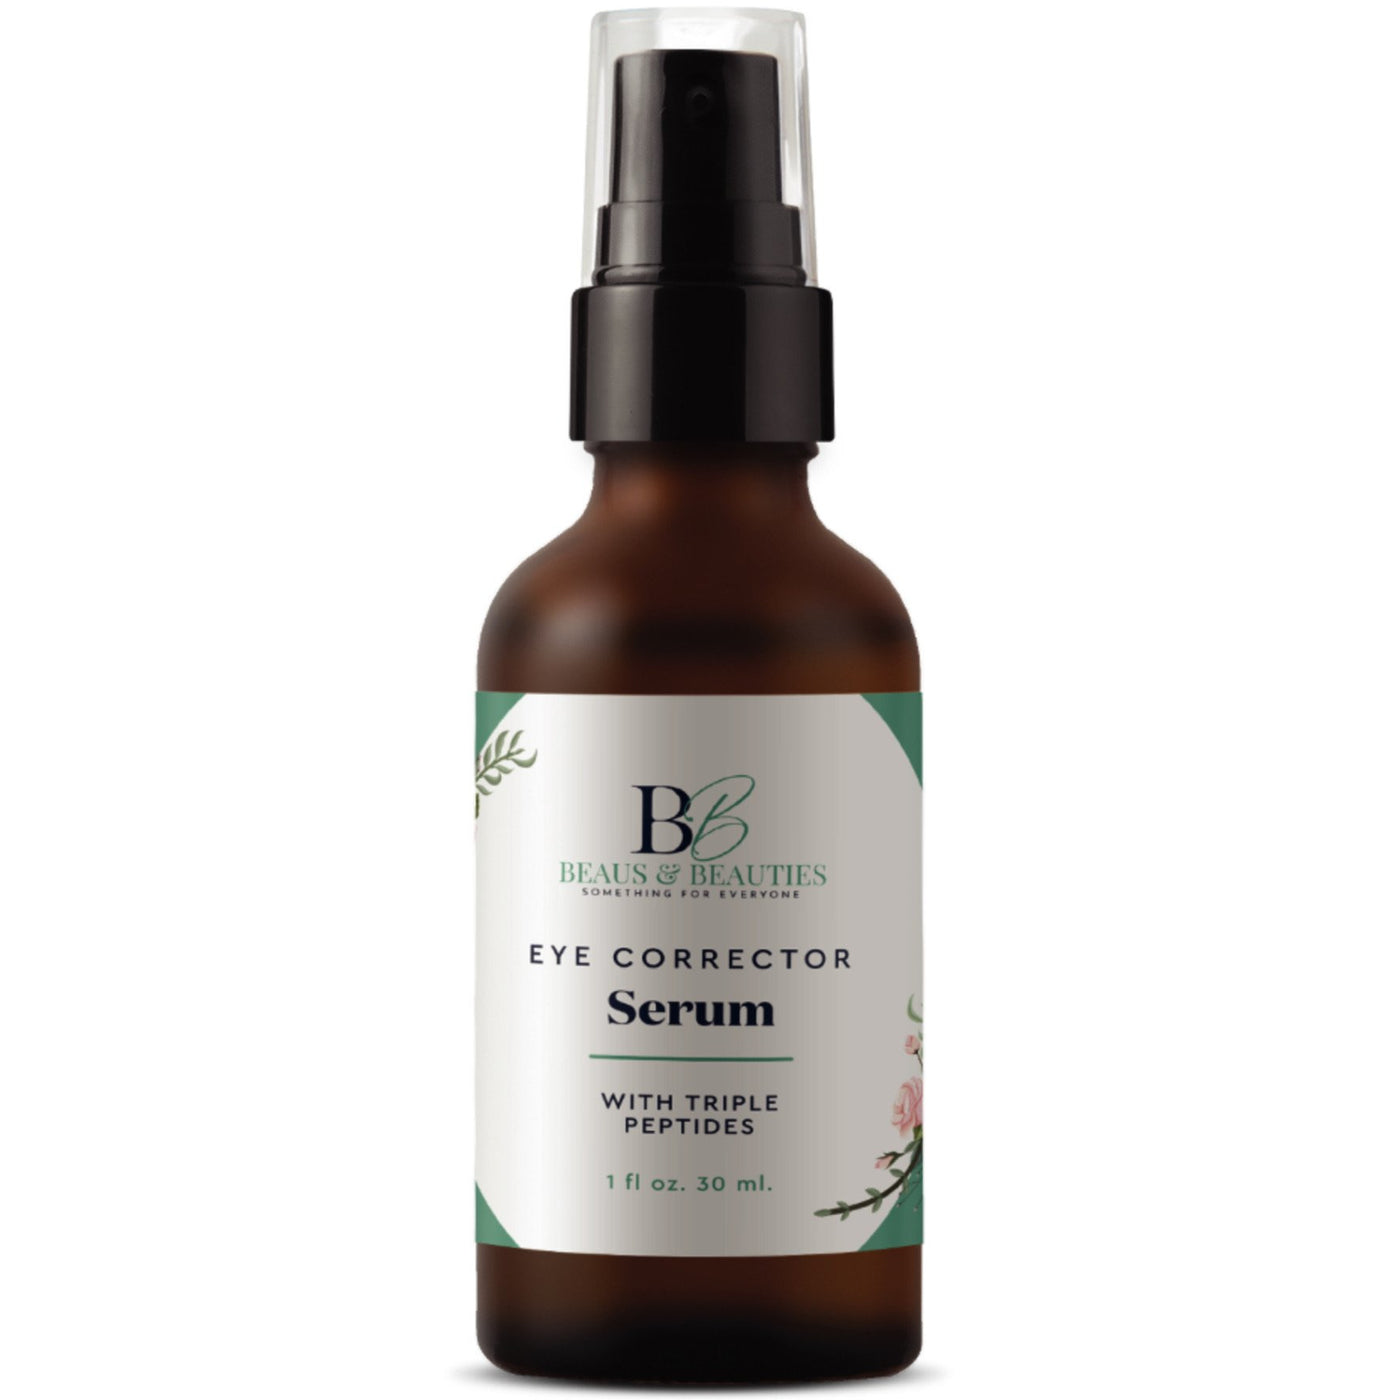 EYE CORRECTION SERUM by Beaus and Beauties